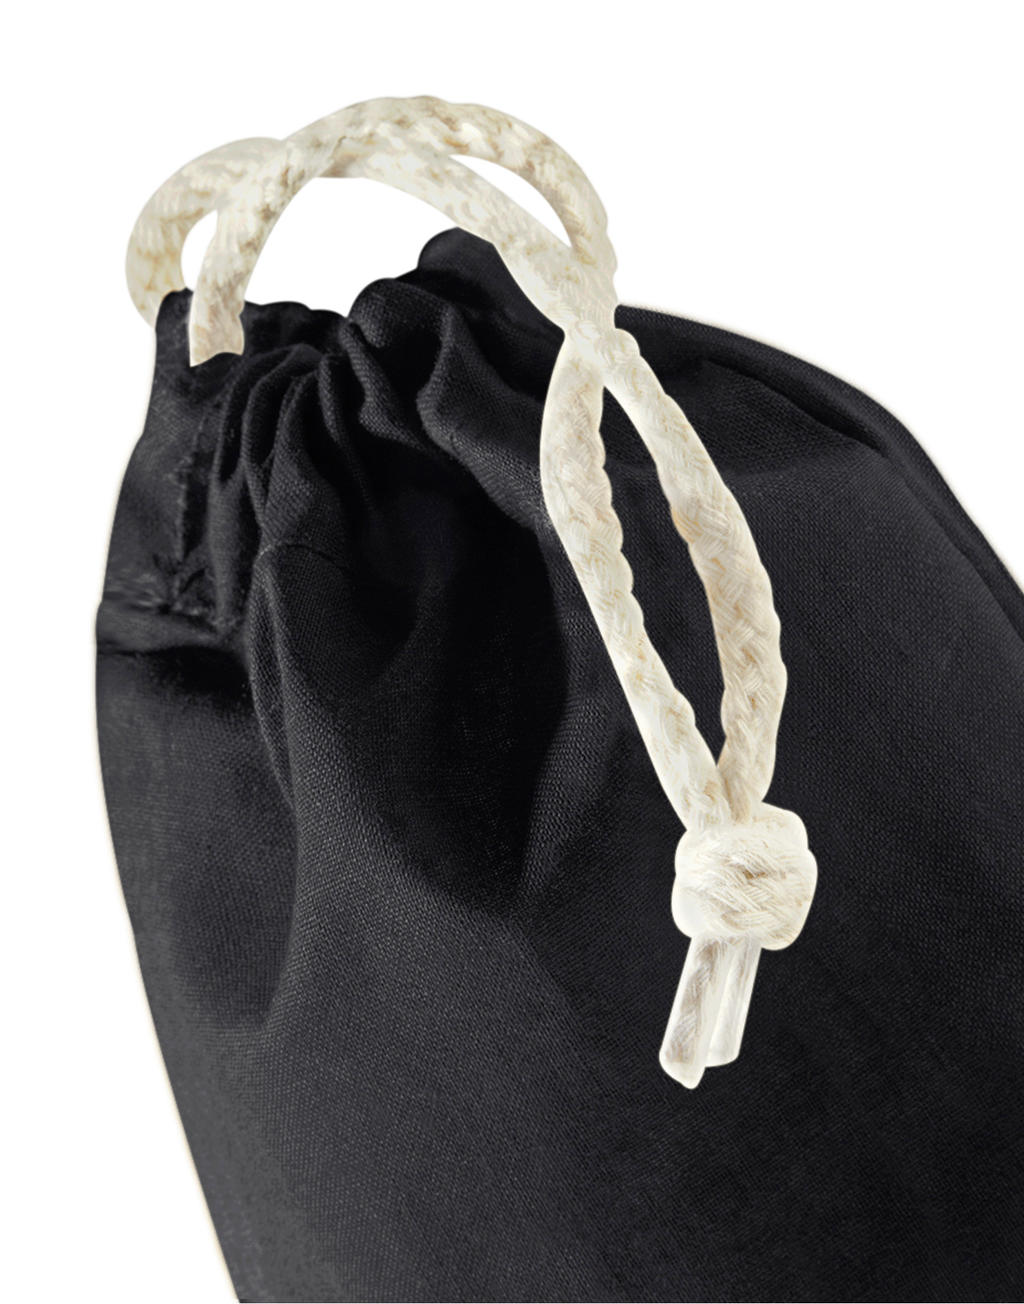  Recycled Cotton Stuff Bag in Farbe Natural